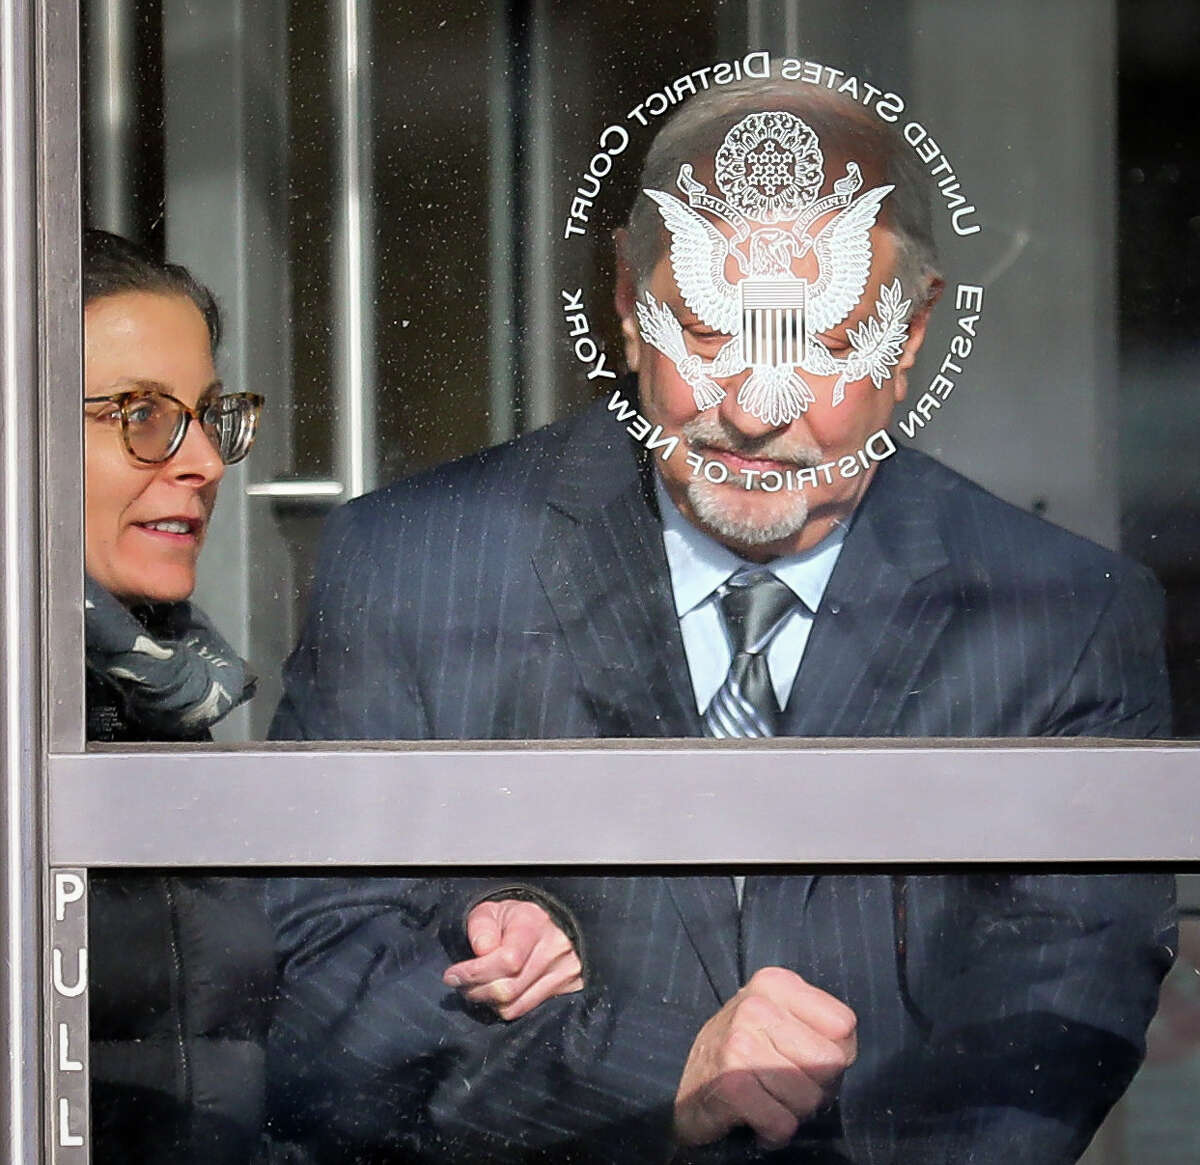 Clare Bronfman, left, a member of Nxivm, an organization charged with sex trafficking, leaves Brooklyn Federal Court with her lawyer Mark Geragos after she received medical attention while in court, Wednesday March 27, 2019, in New York.